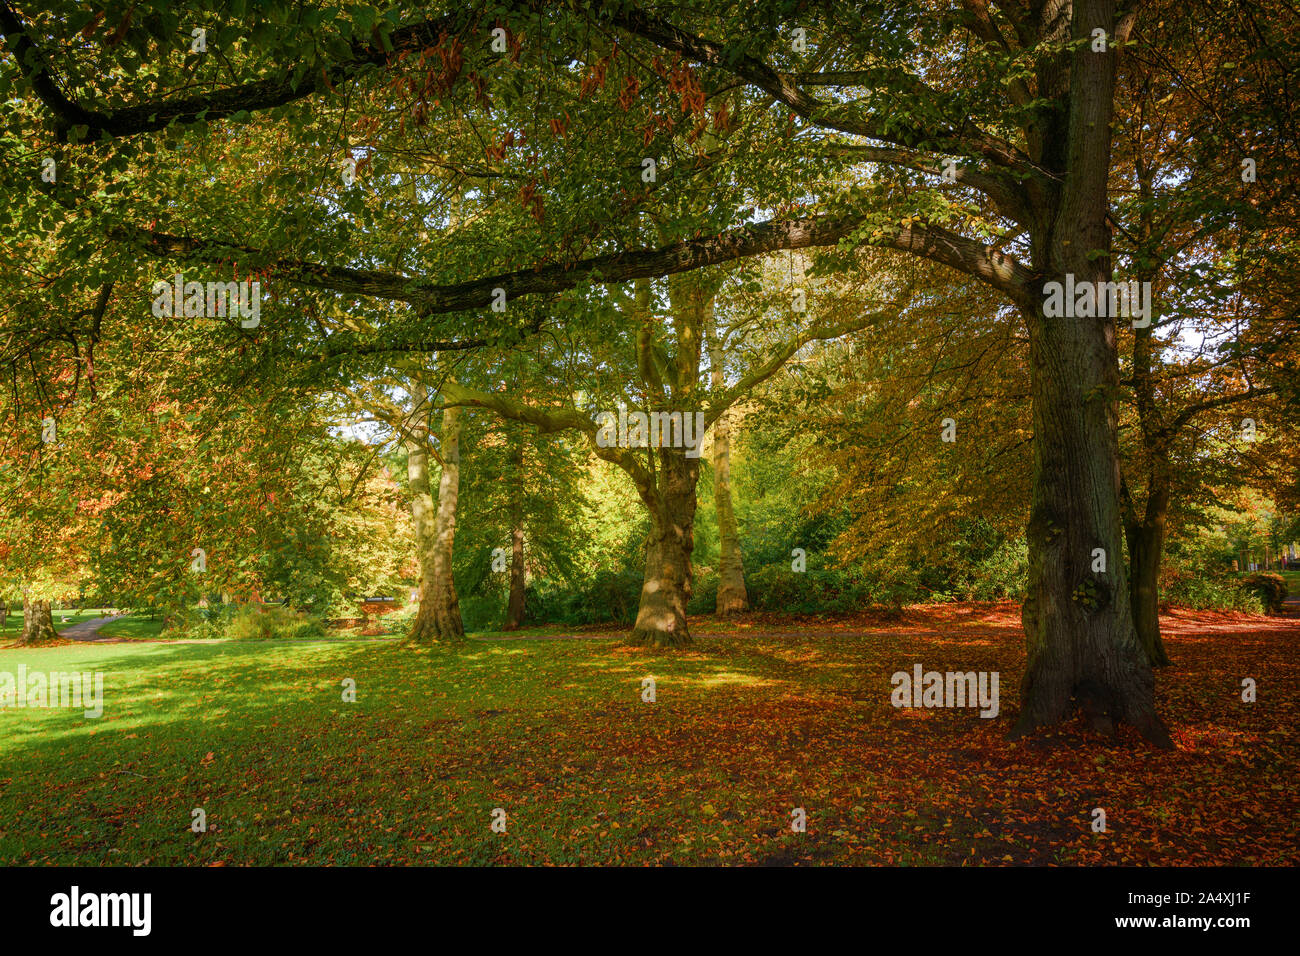 Beautiful autumn trees with colorful leaves in an old park, seasonal nature background, selected focus Stock Photo